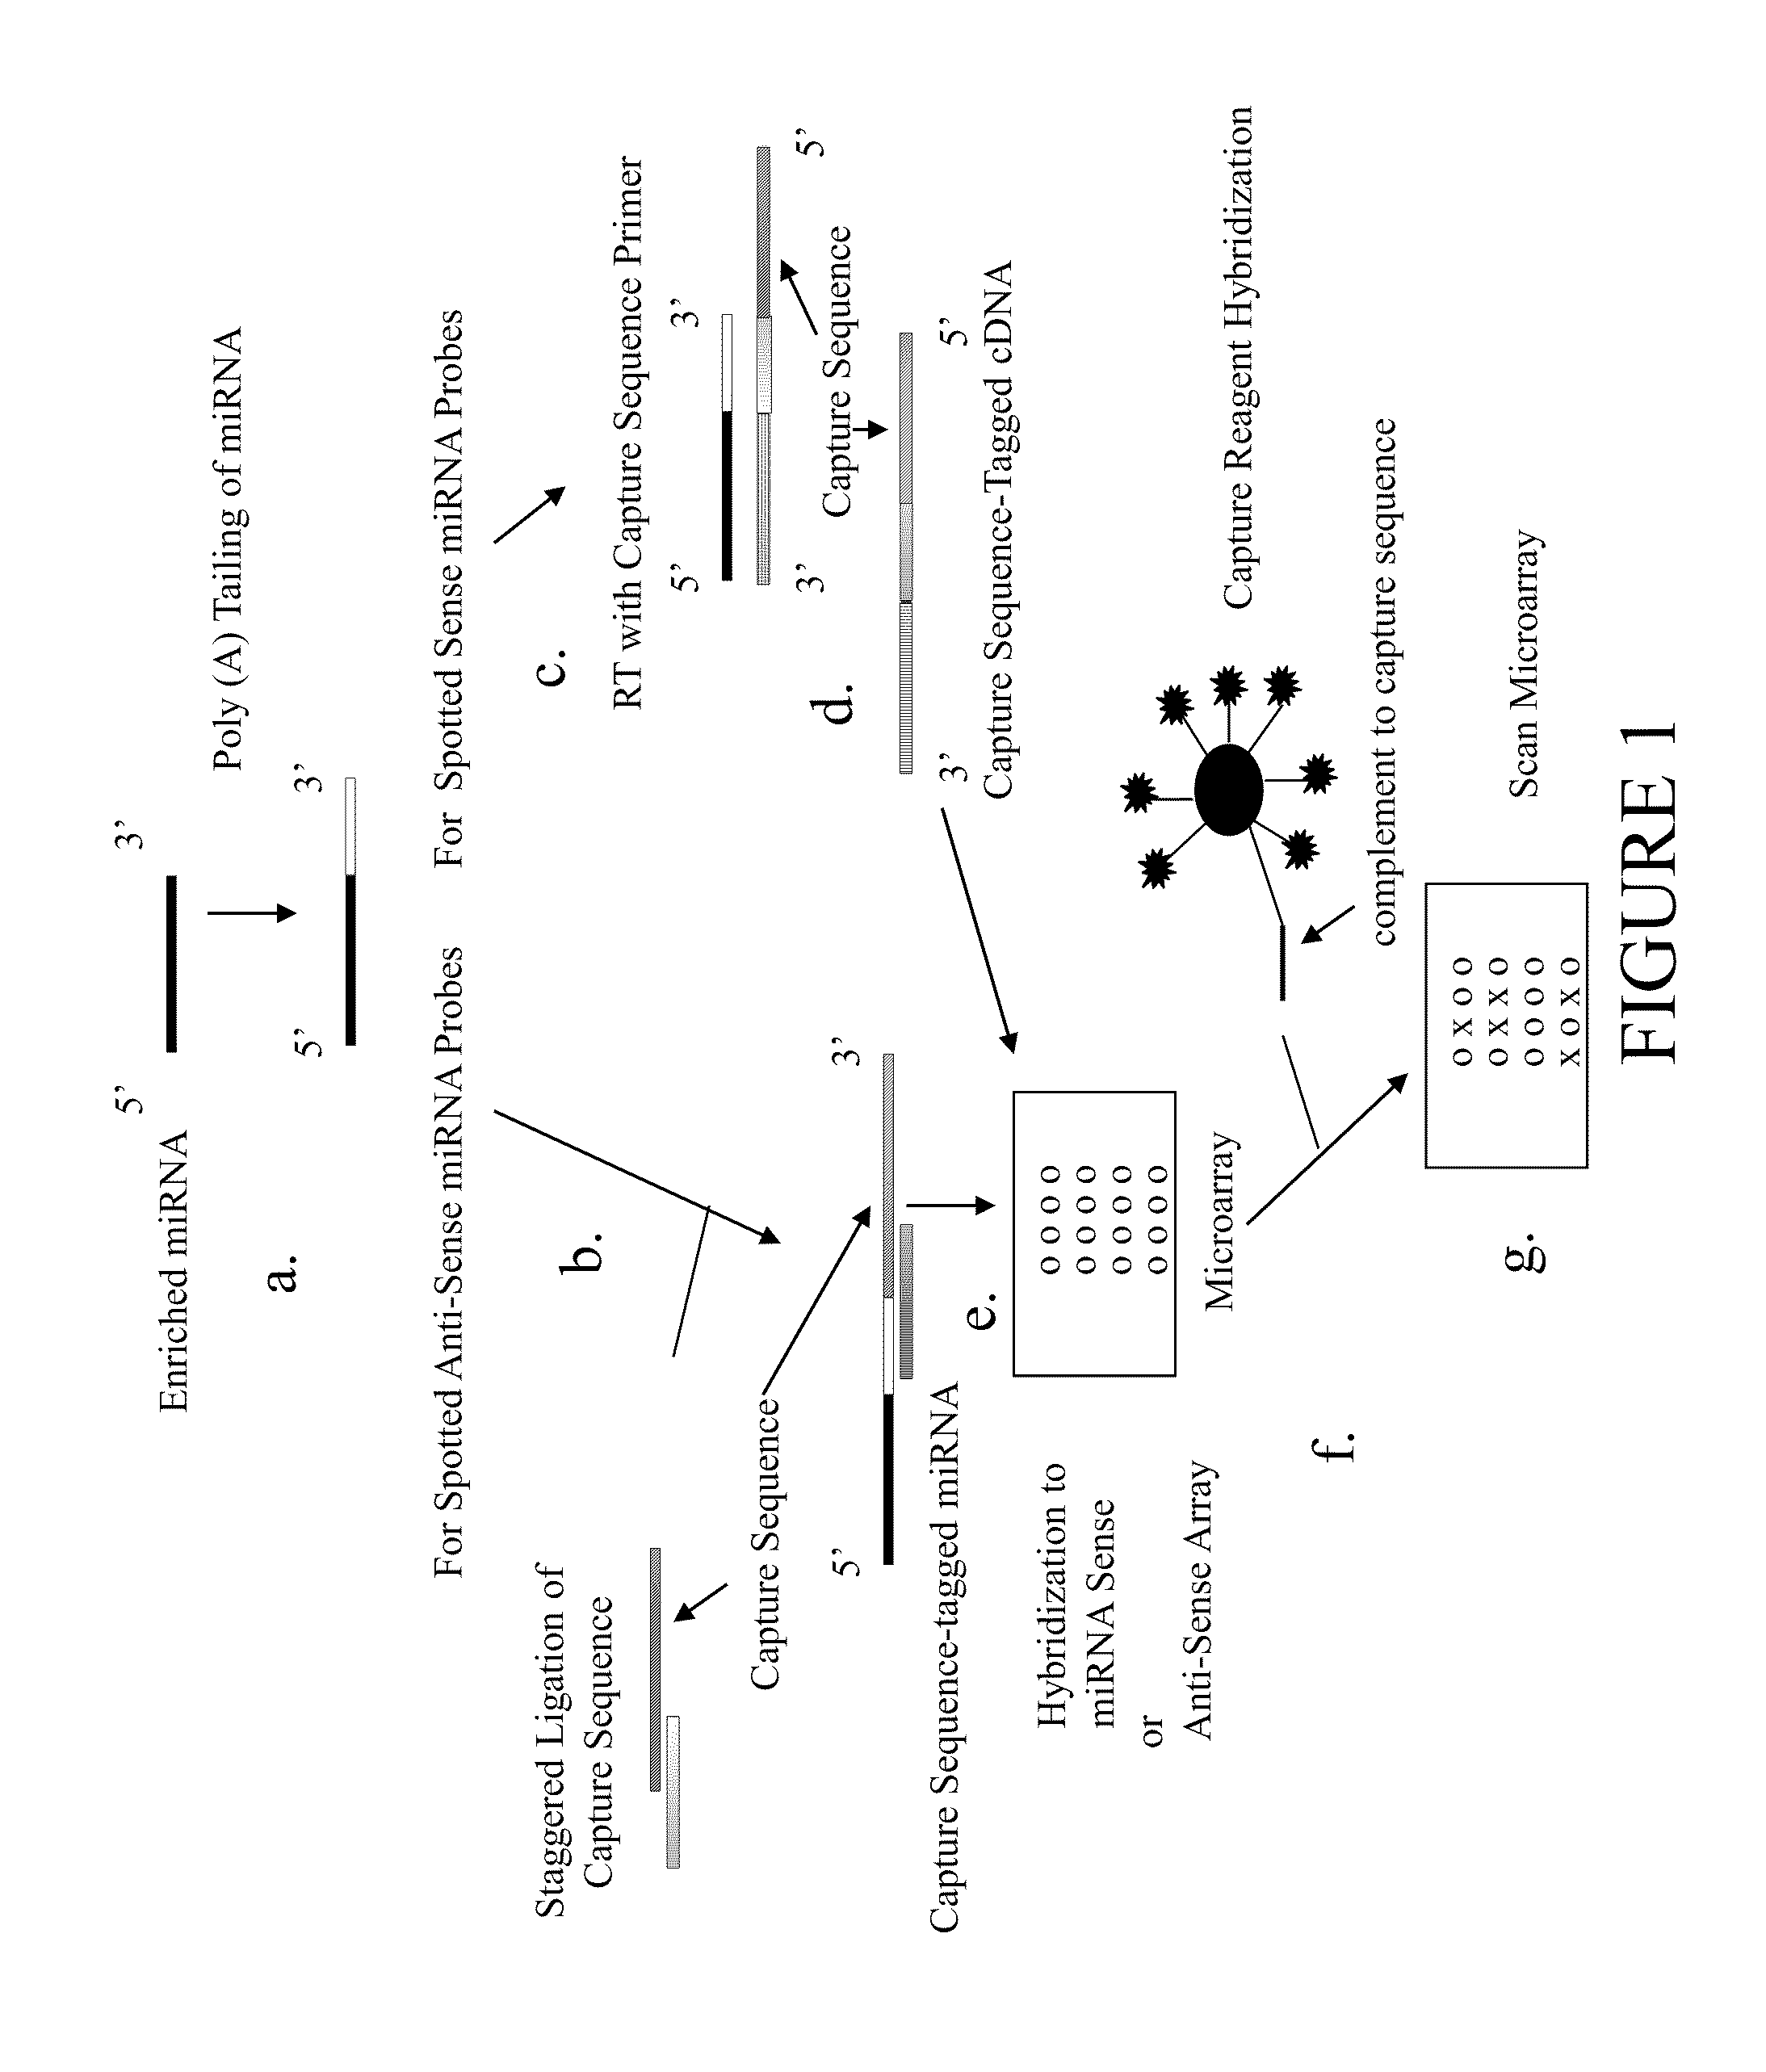 Methods for Detection of Micro RNA Molecules